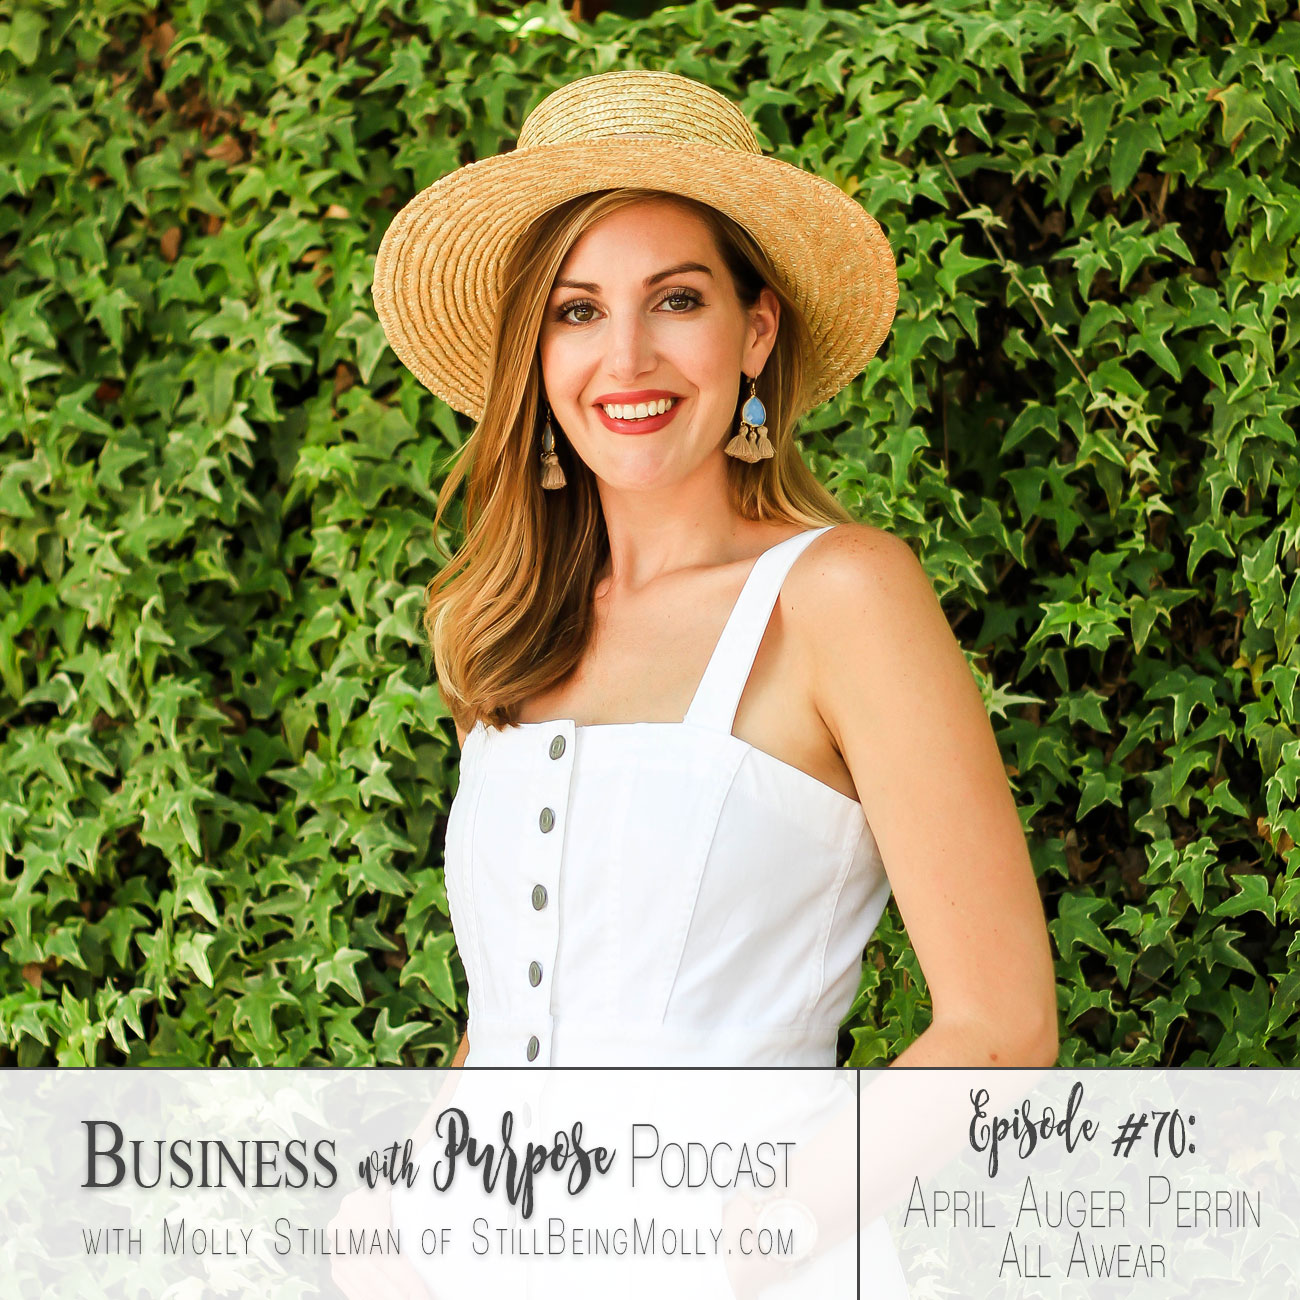 Business with Purpose Podcast EP 70: April Auger Perrin, ALL AWEAR ethical fashion by popular North Carolina blogger and podcaster Still Being Molly